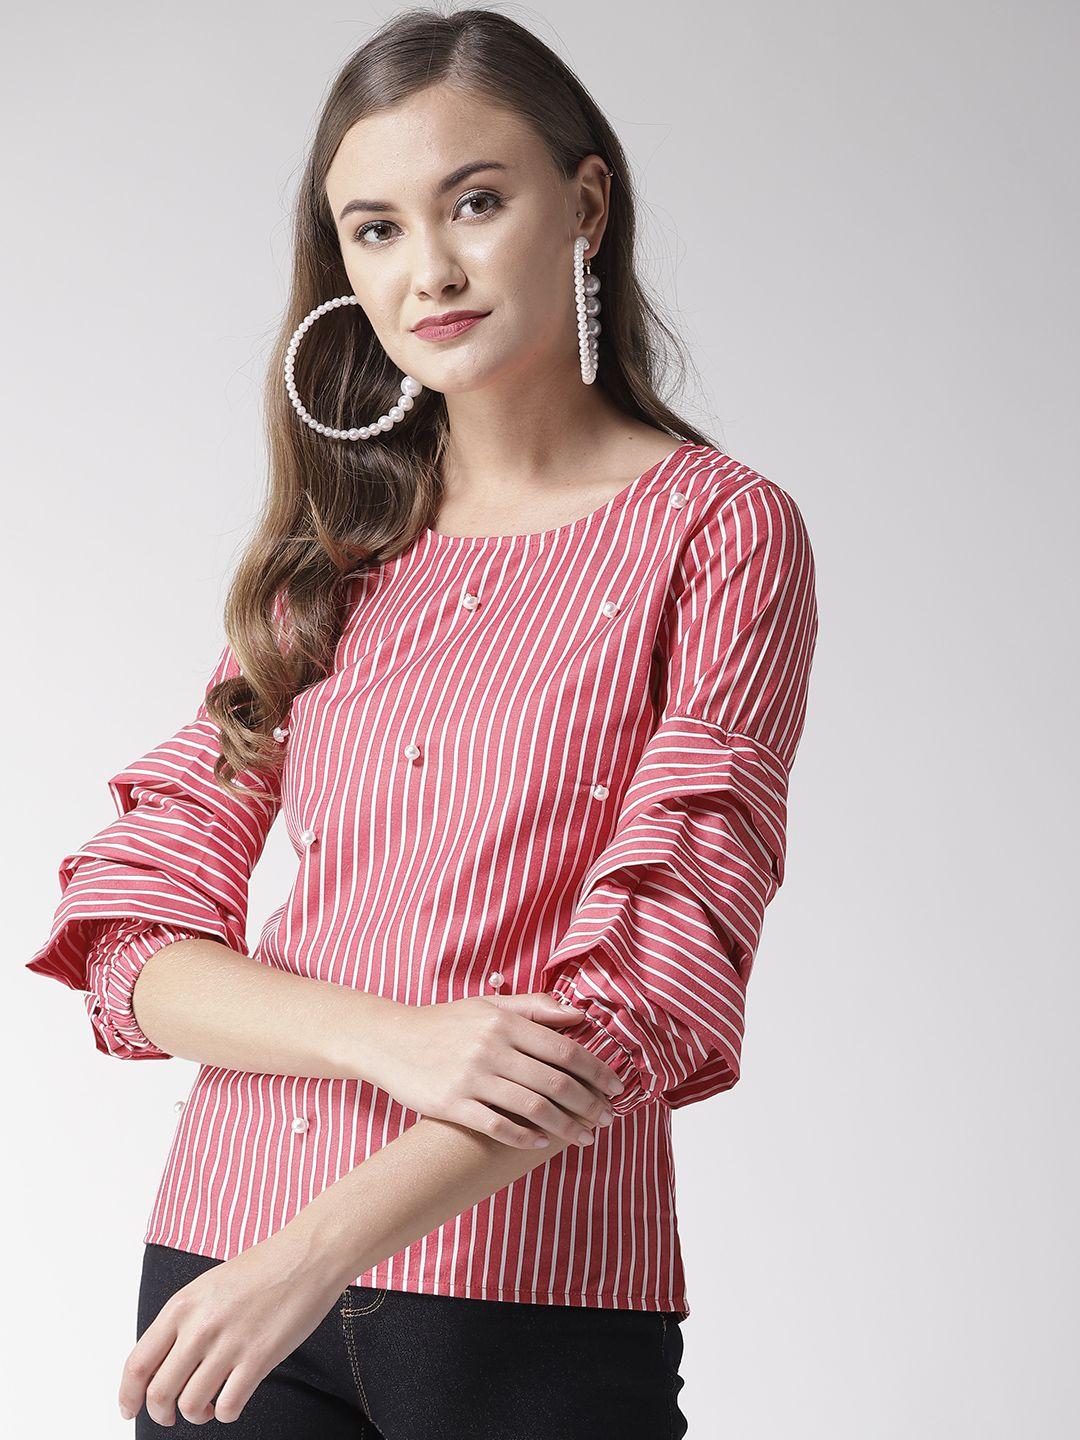 style quotient women red & white striped top